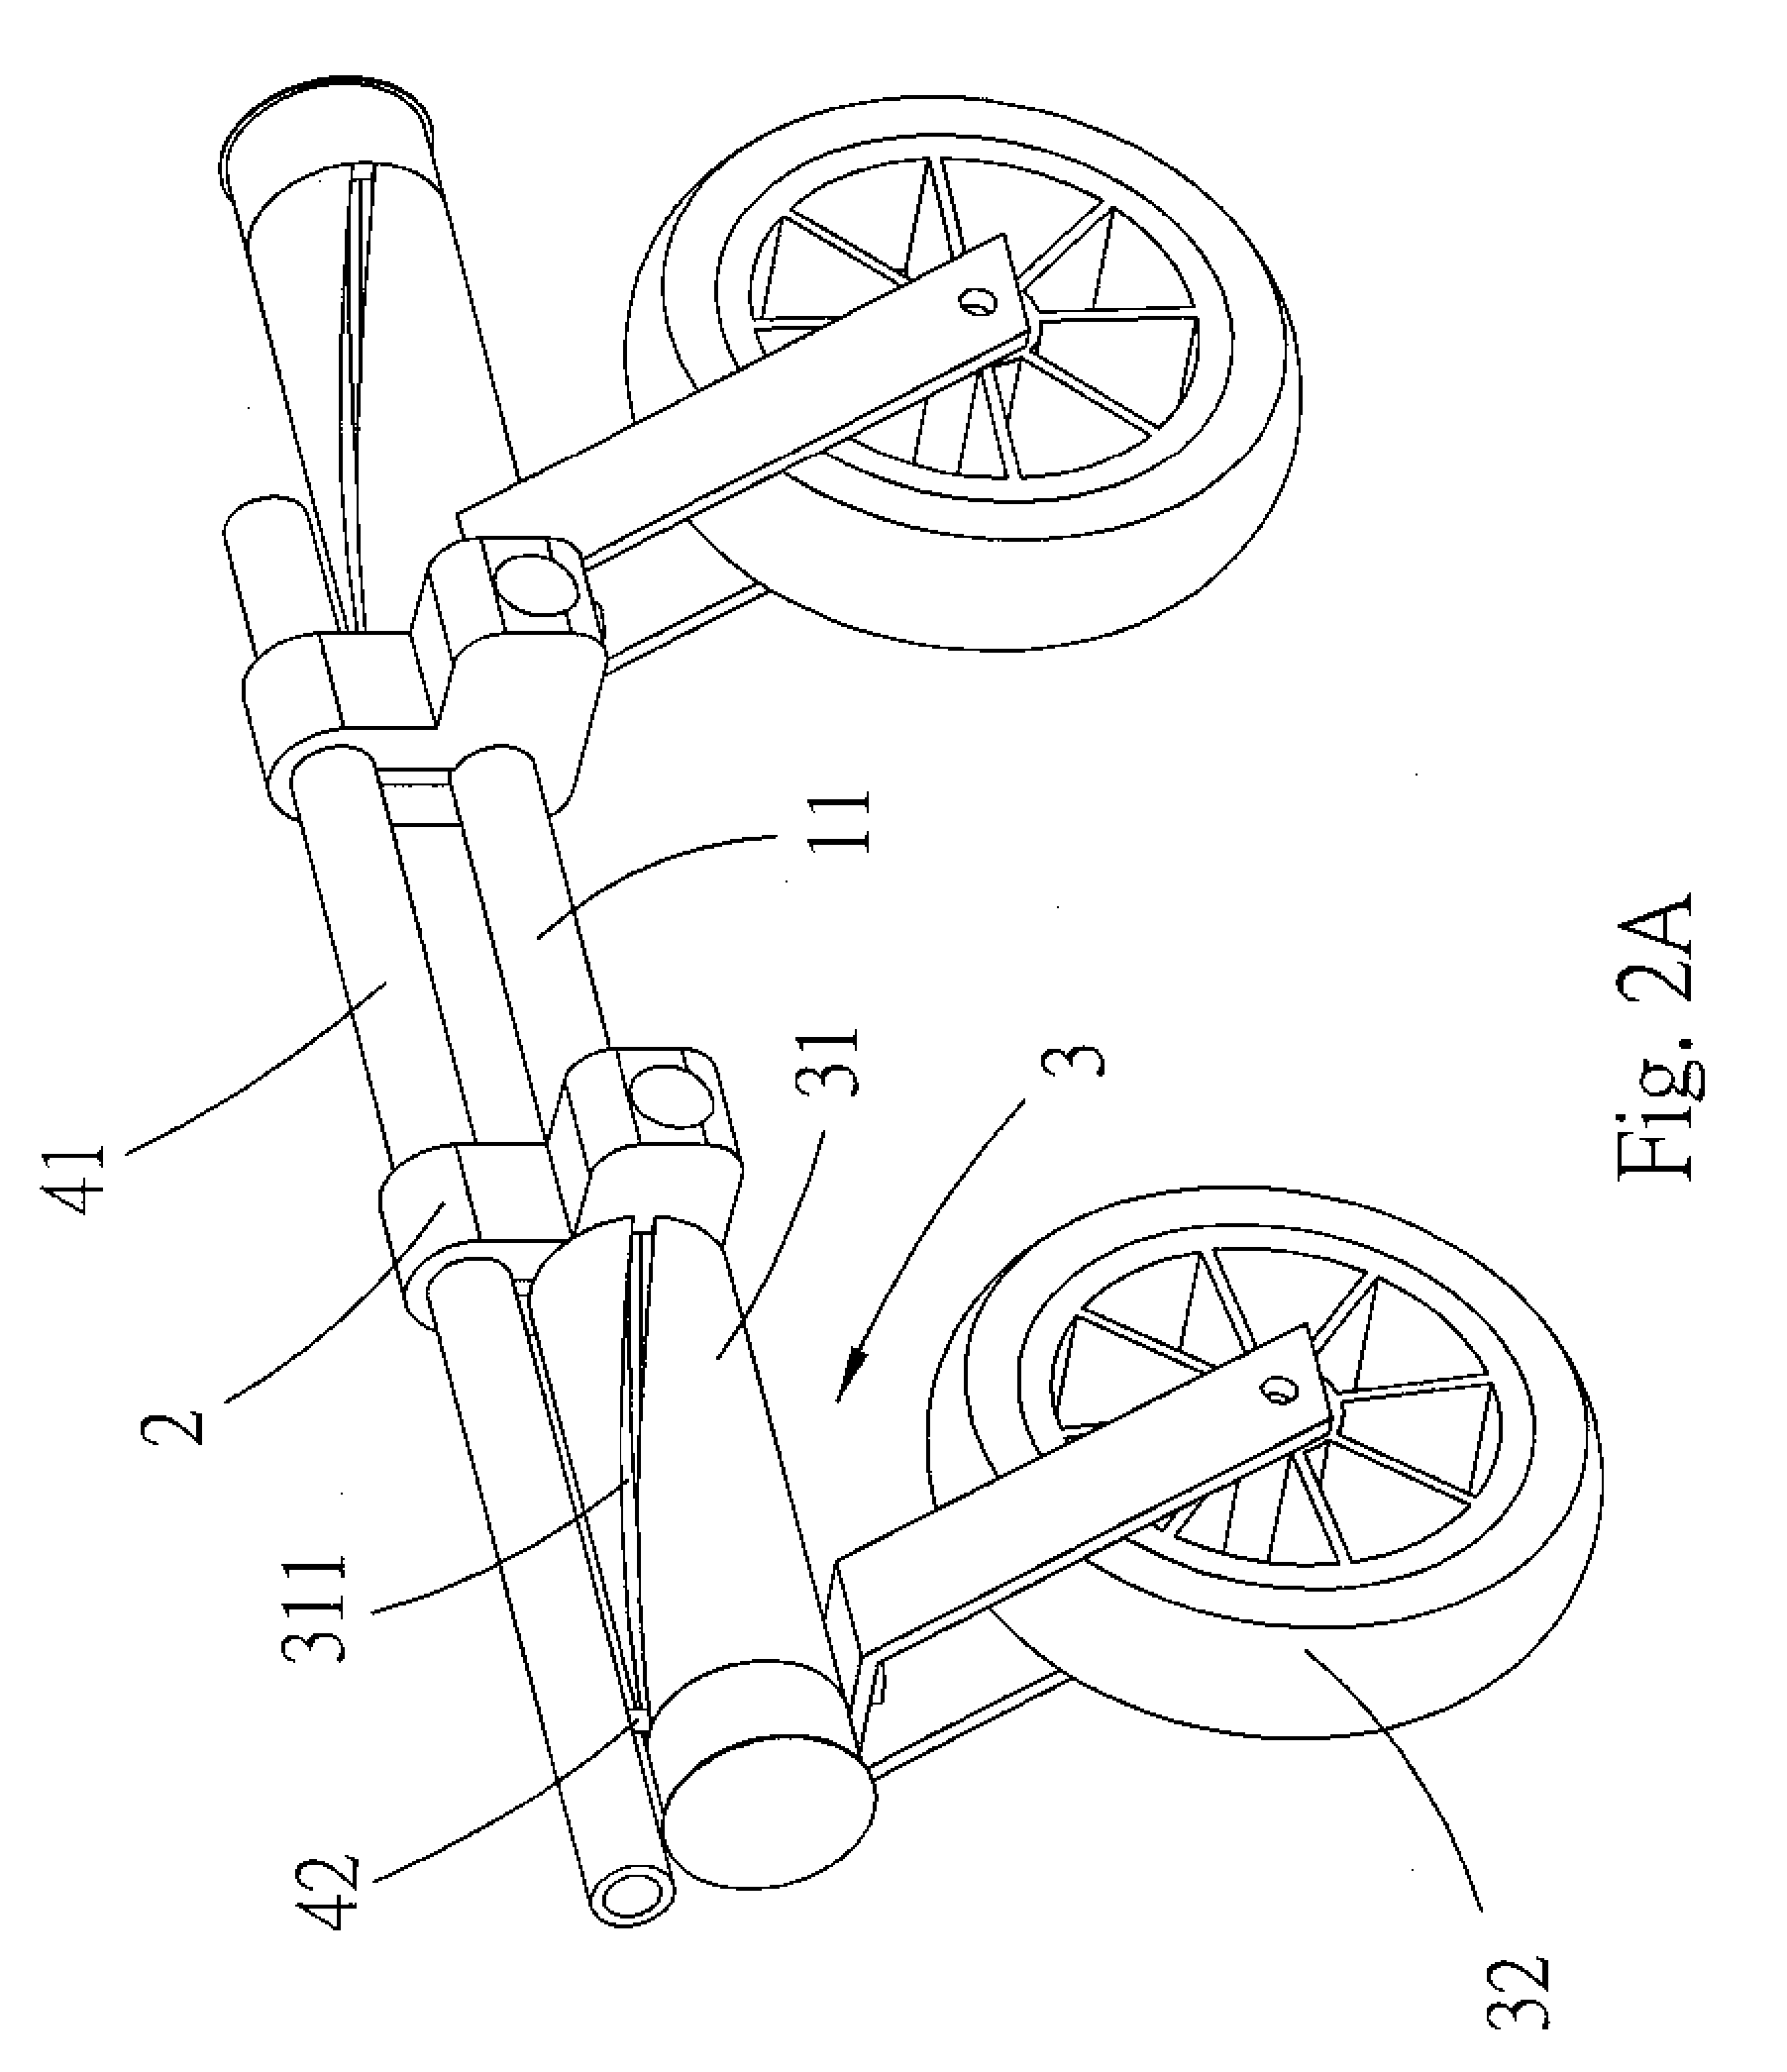 Wheel frame assembly for quickly expansion and folding